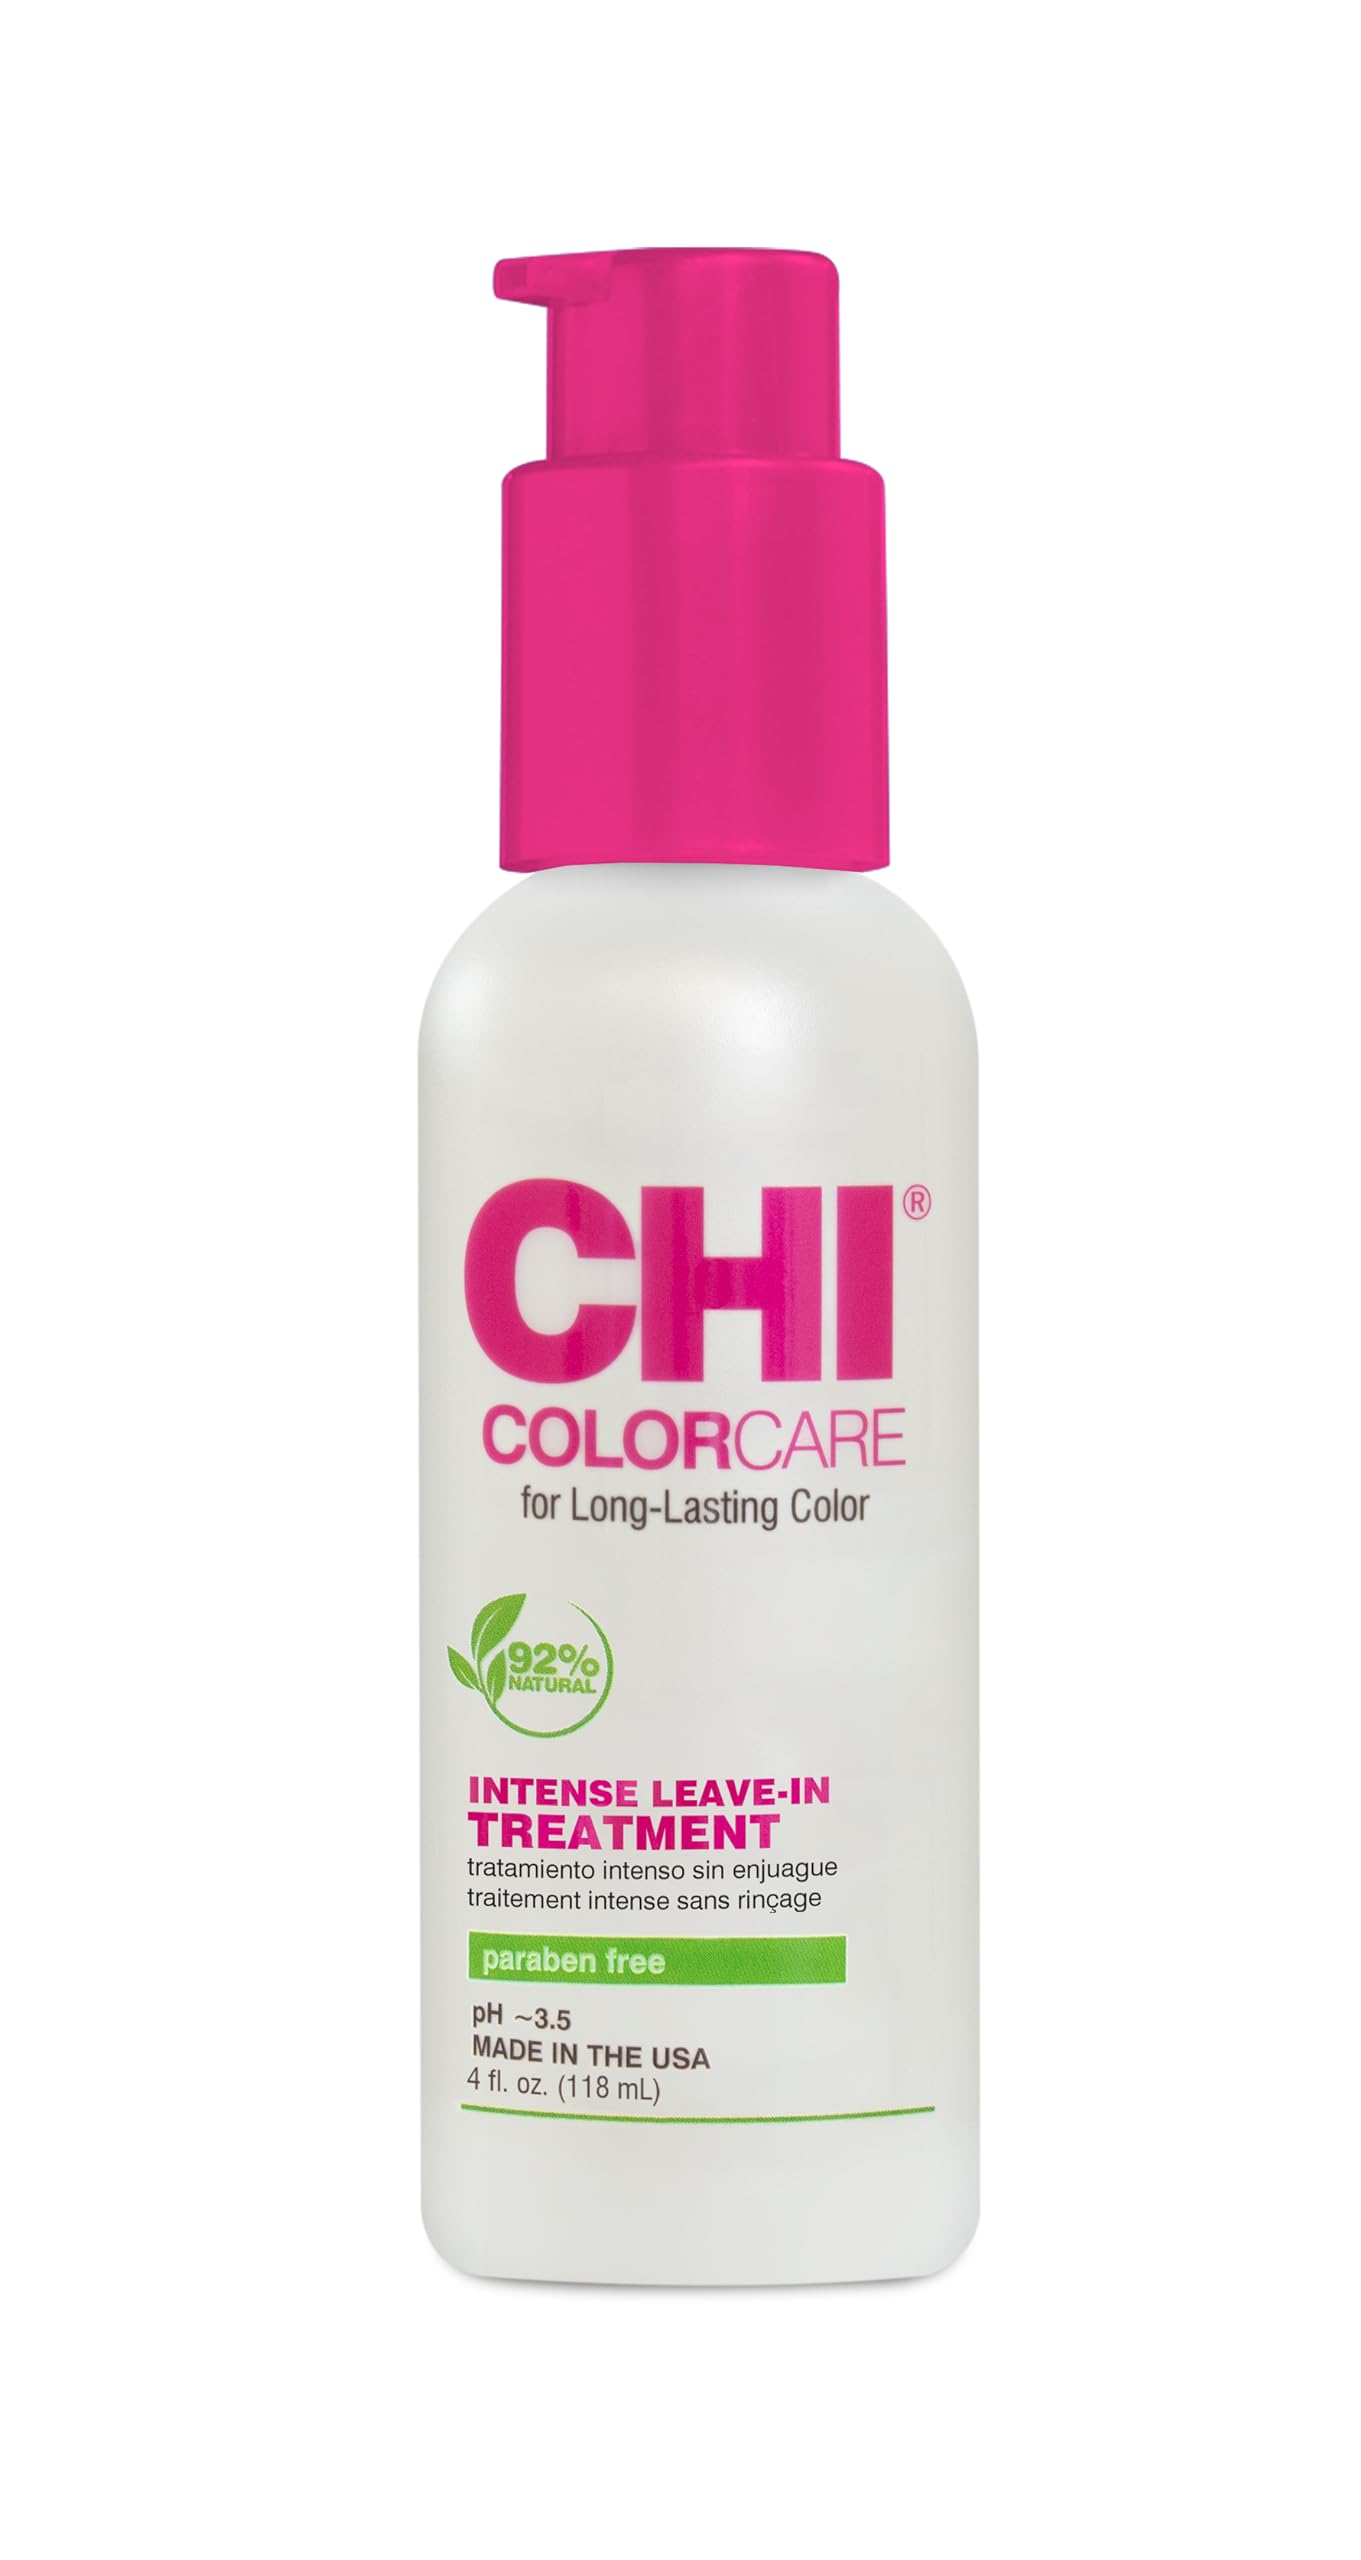 CHi ColorCare Intense Leave-In Treatment - Multi-Benefit Leave-In Treatment Intensely Revives and Nourishes Dull Hair